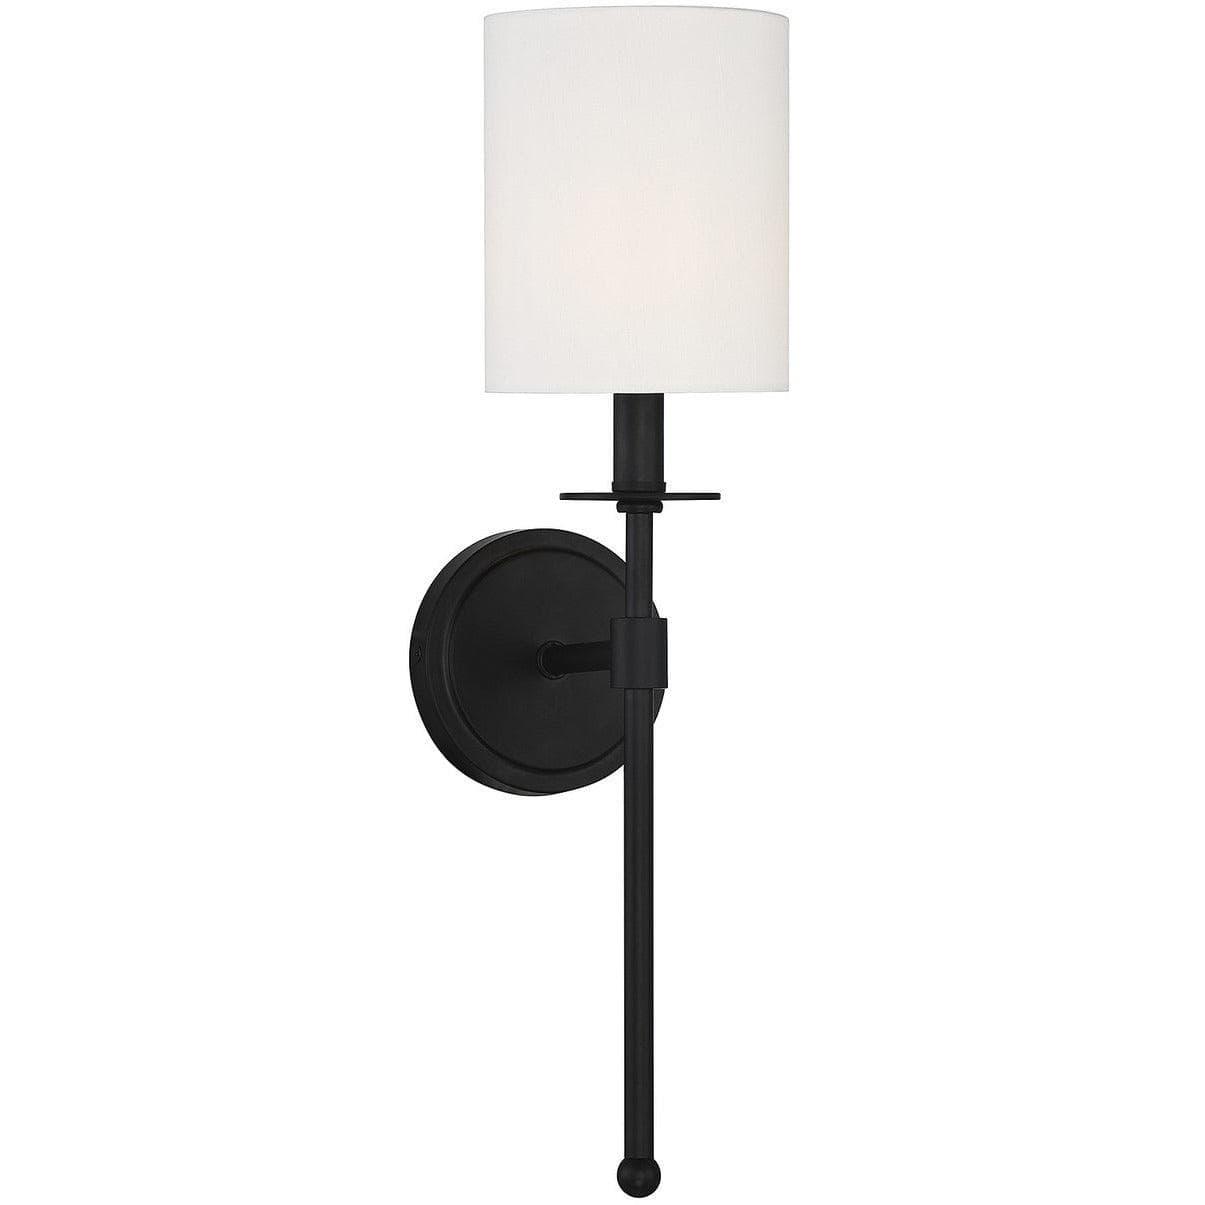 Meridian Lite Trends - Meridian One Light Wall Sconce - M90057MBK | Montreal Lighting & Hardware